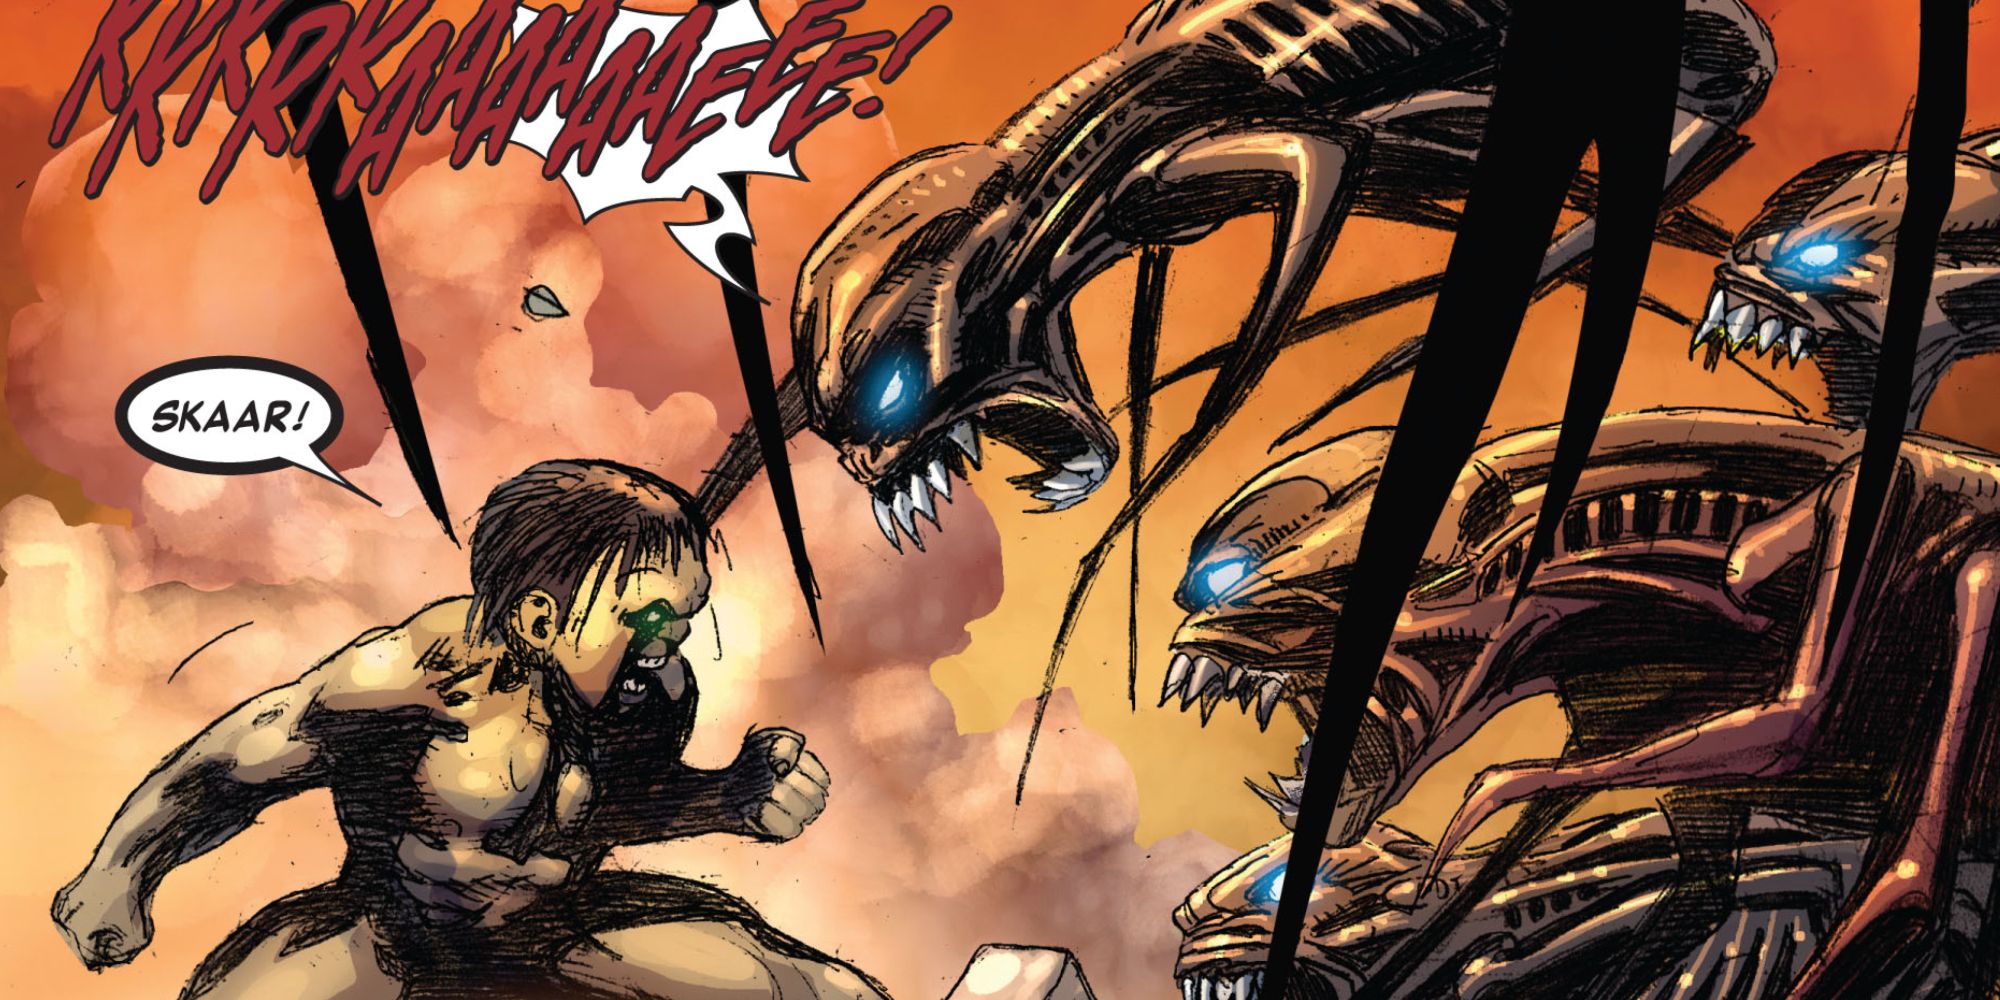 A young Skaar fights alien insects in Marvel Comics.